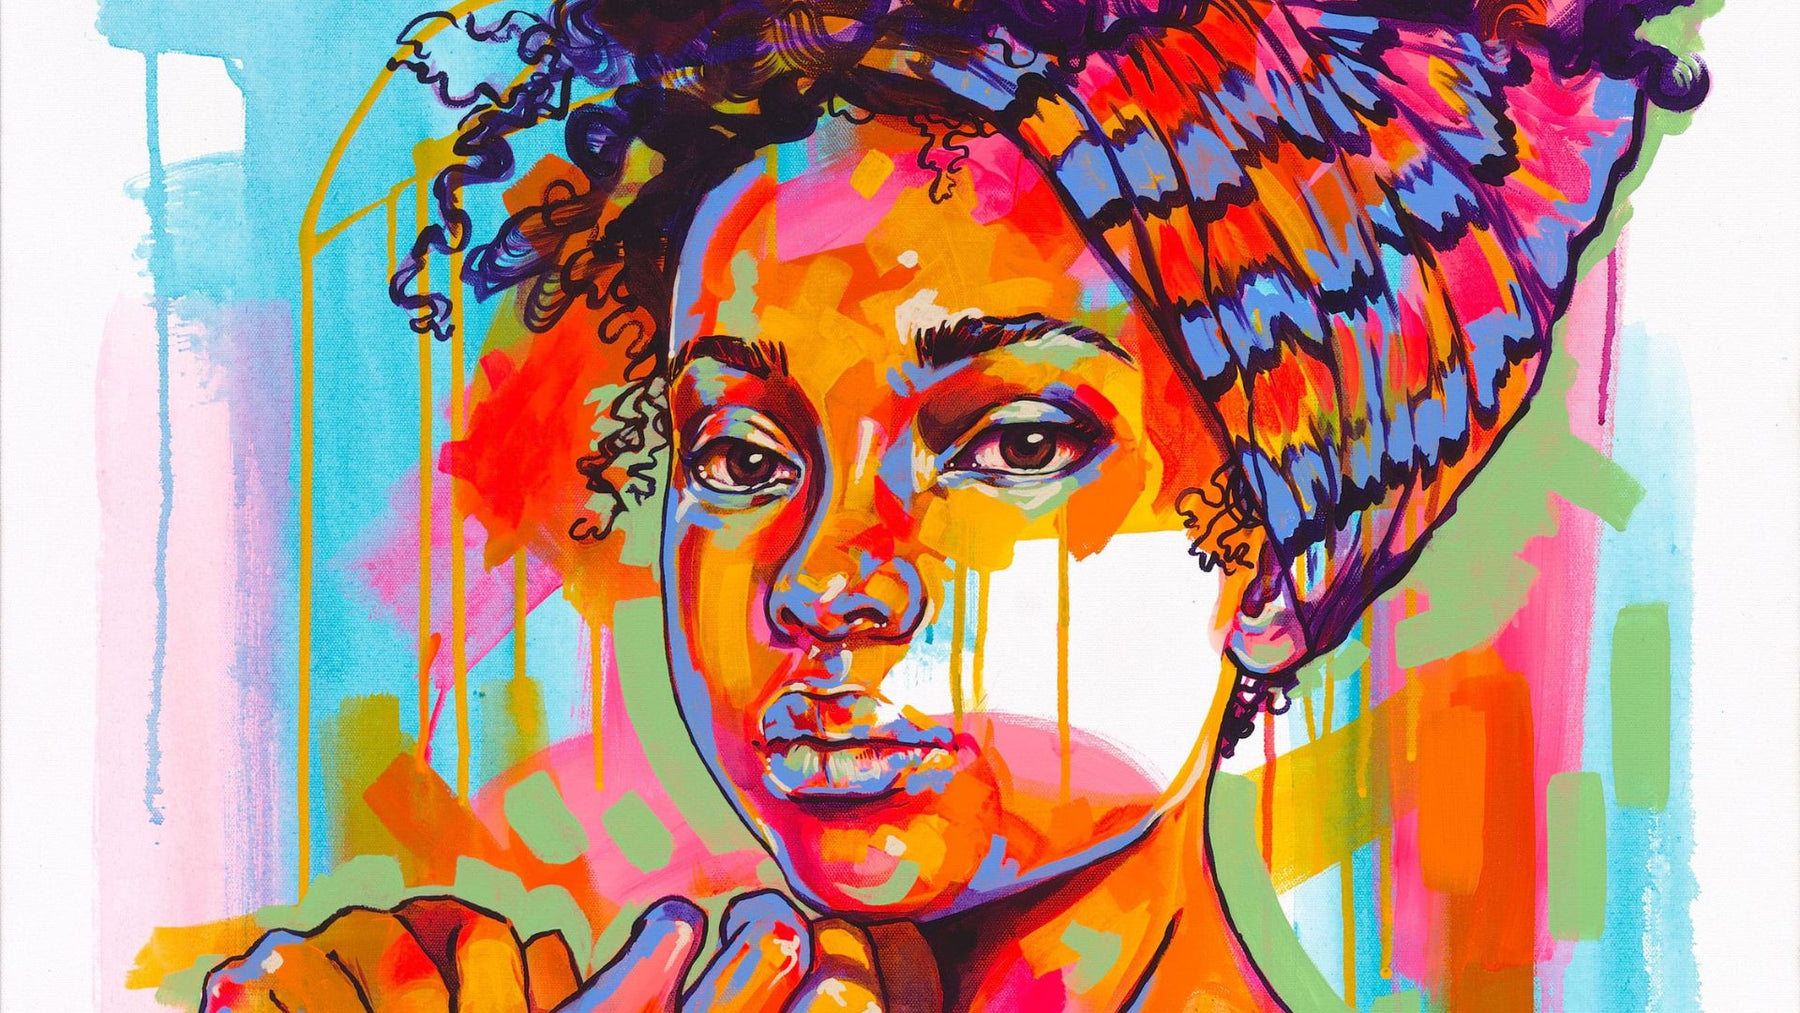 An image of a vibrant acrylic painting of a strong black woman titled 